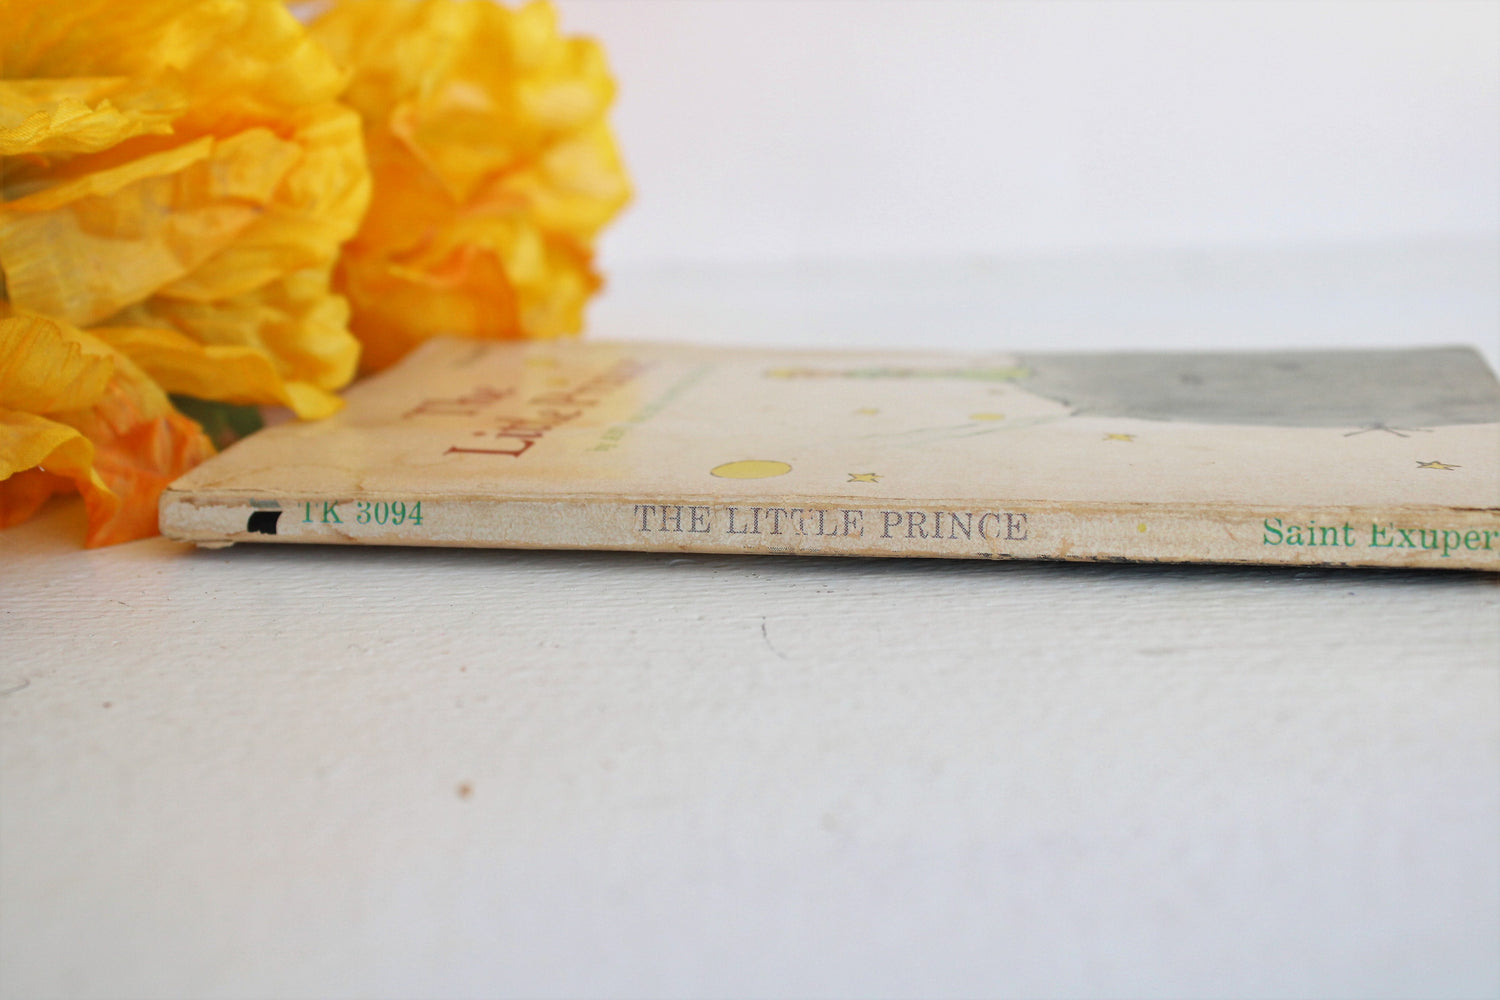 Vintage 1970s Book, "The Little Prince" by Exupery